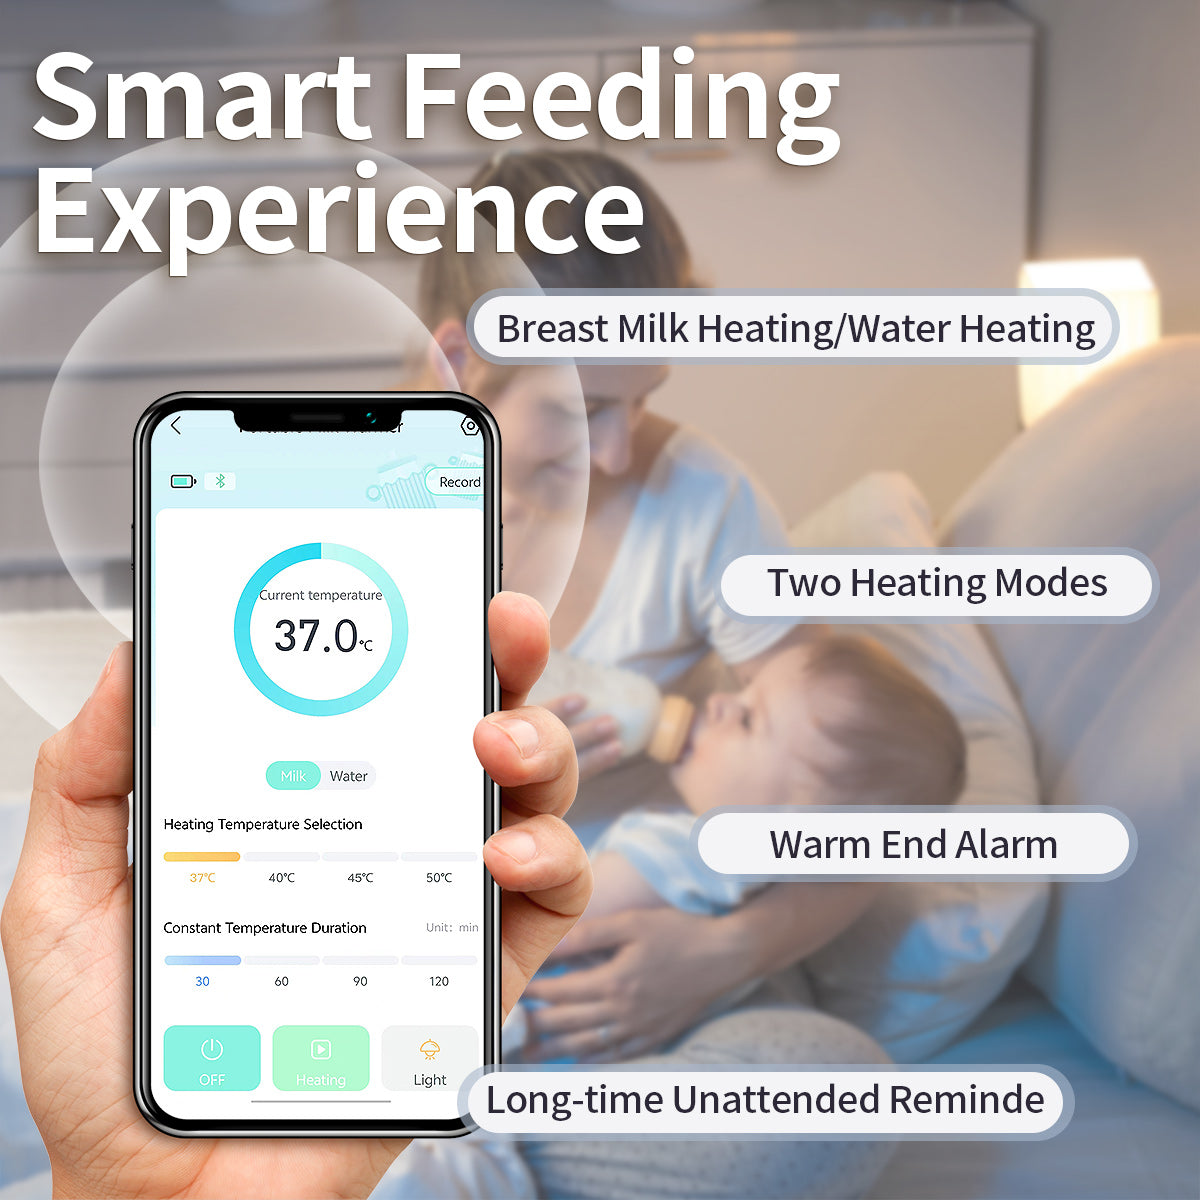 Momwilike Smart Portable Bottle Warmer brings convenience and warmth to your feeding routine, connecting you to efficiency and comfort.